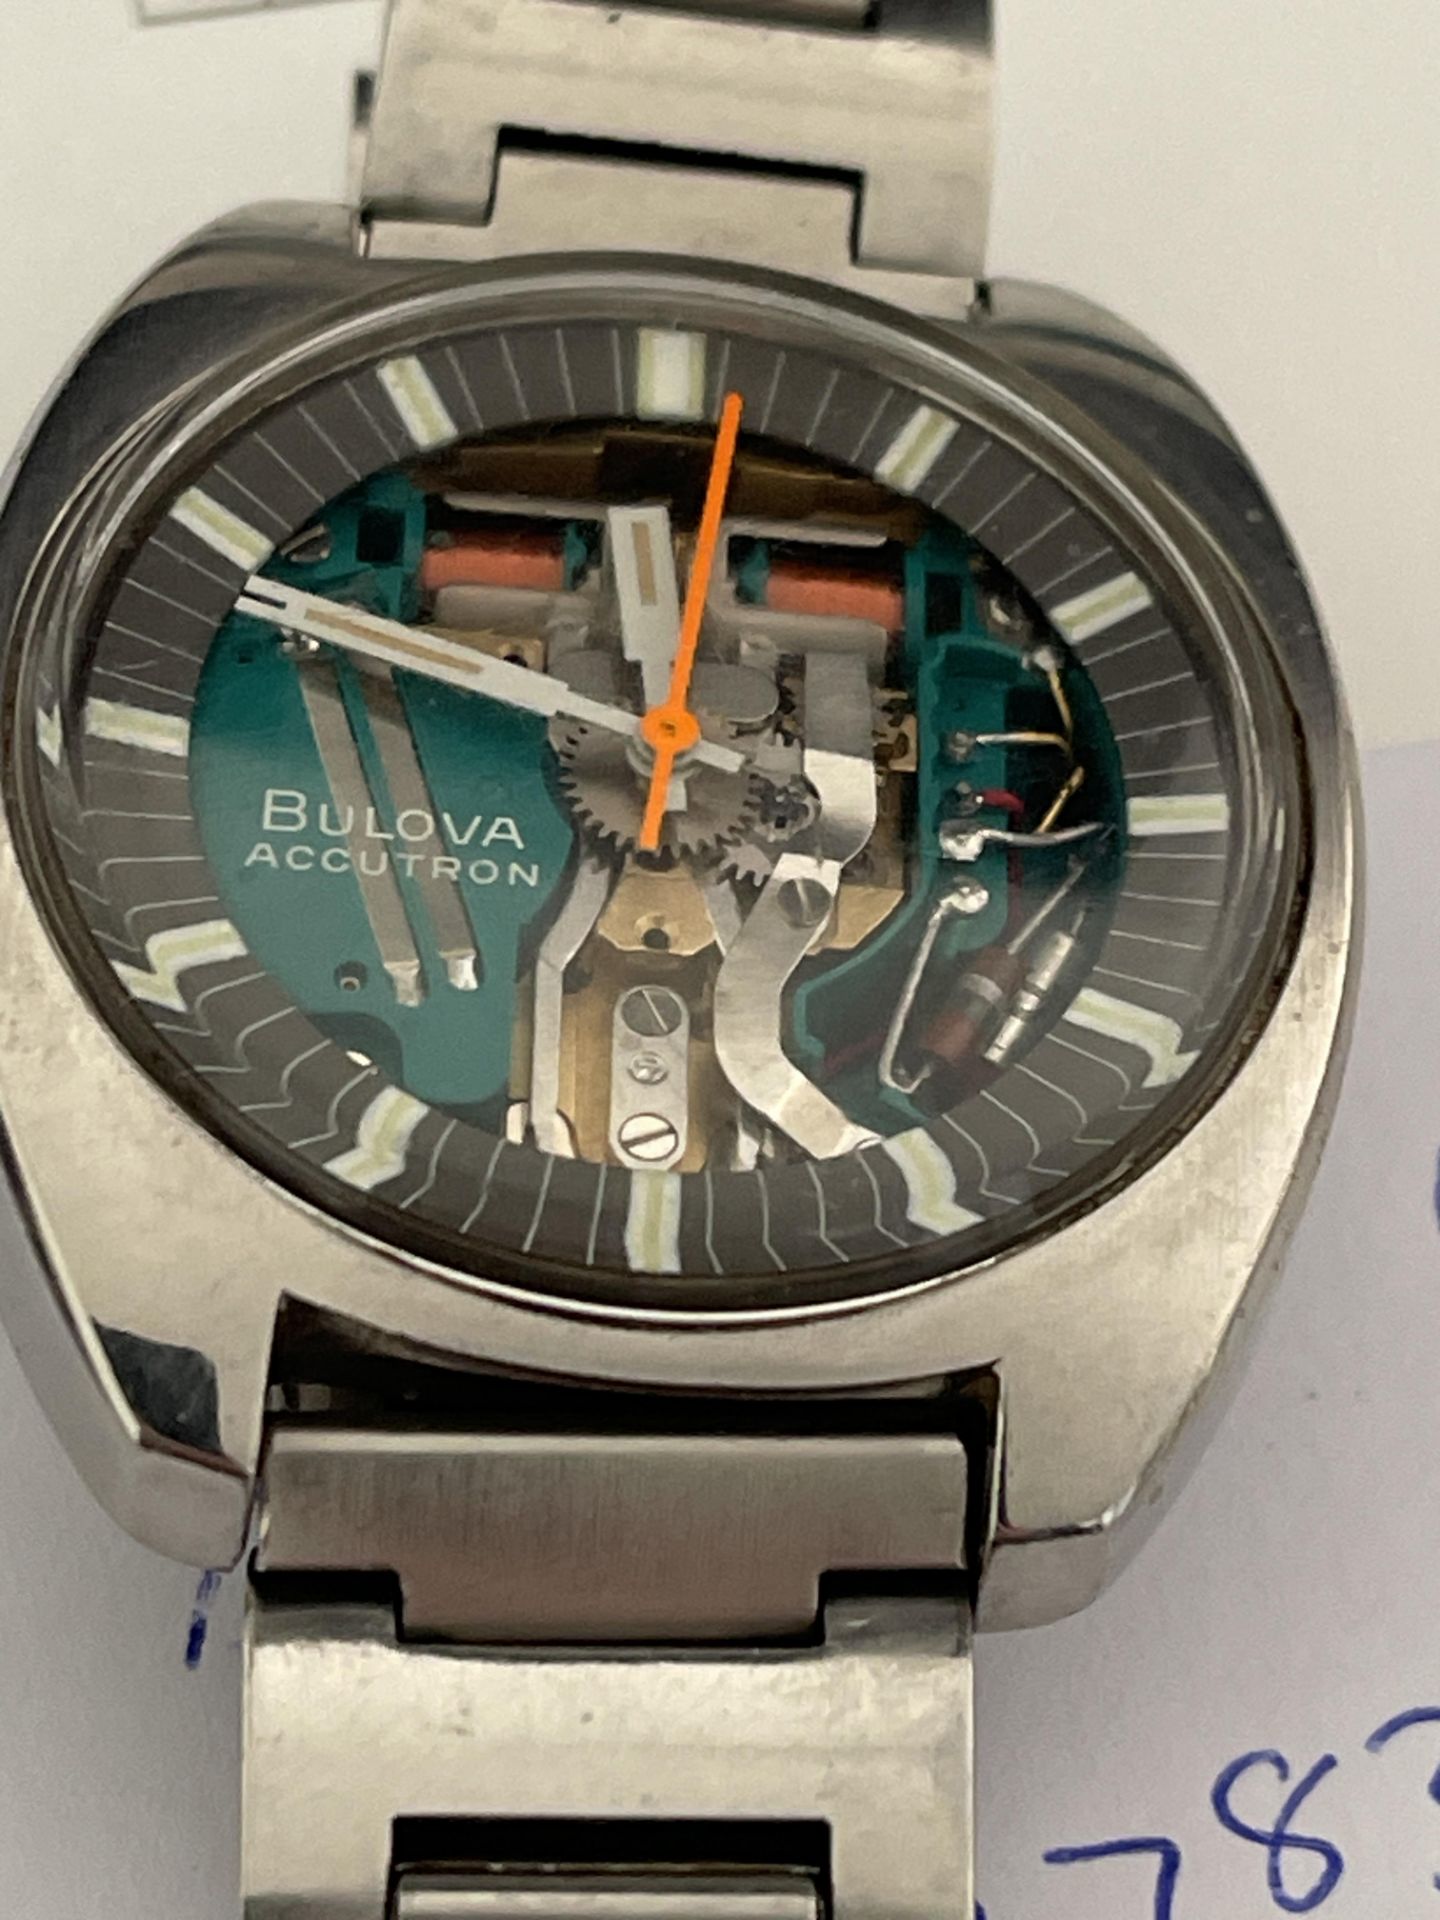 The Bulova Accutron space view watch fully working - Image 4 of 4